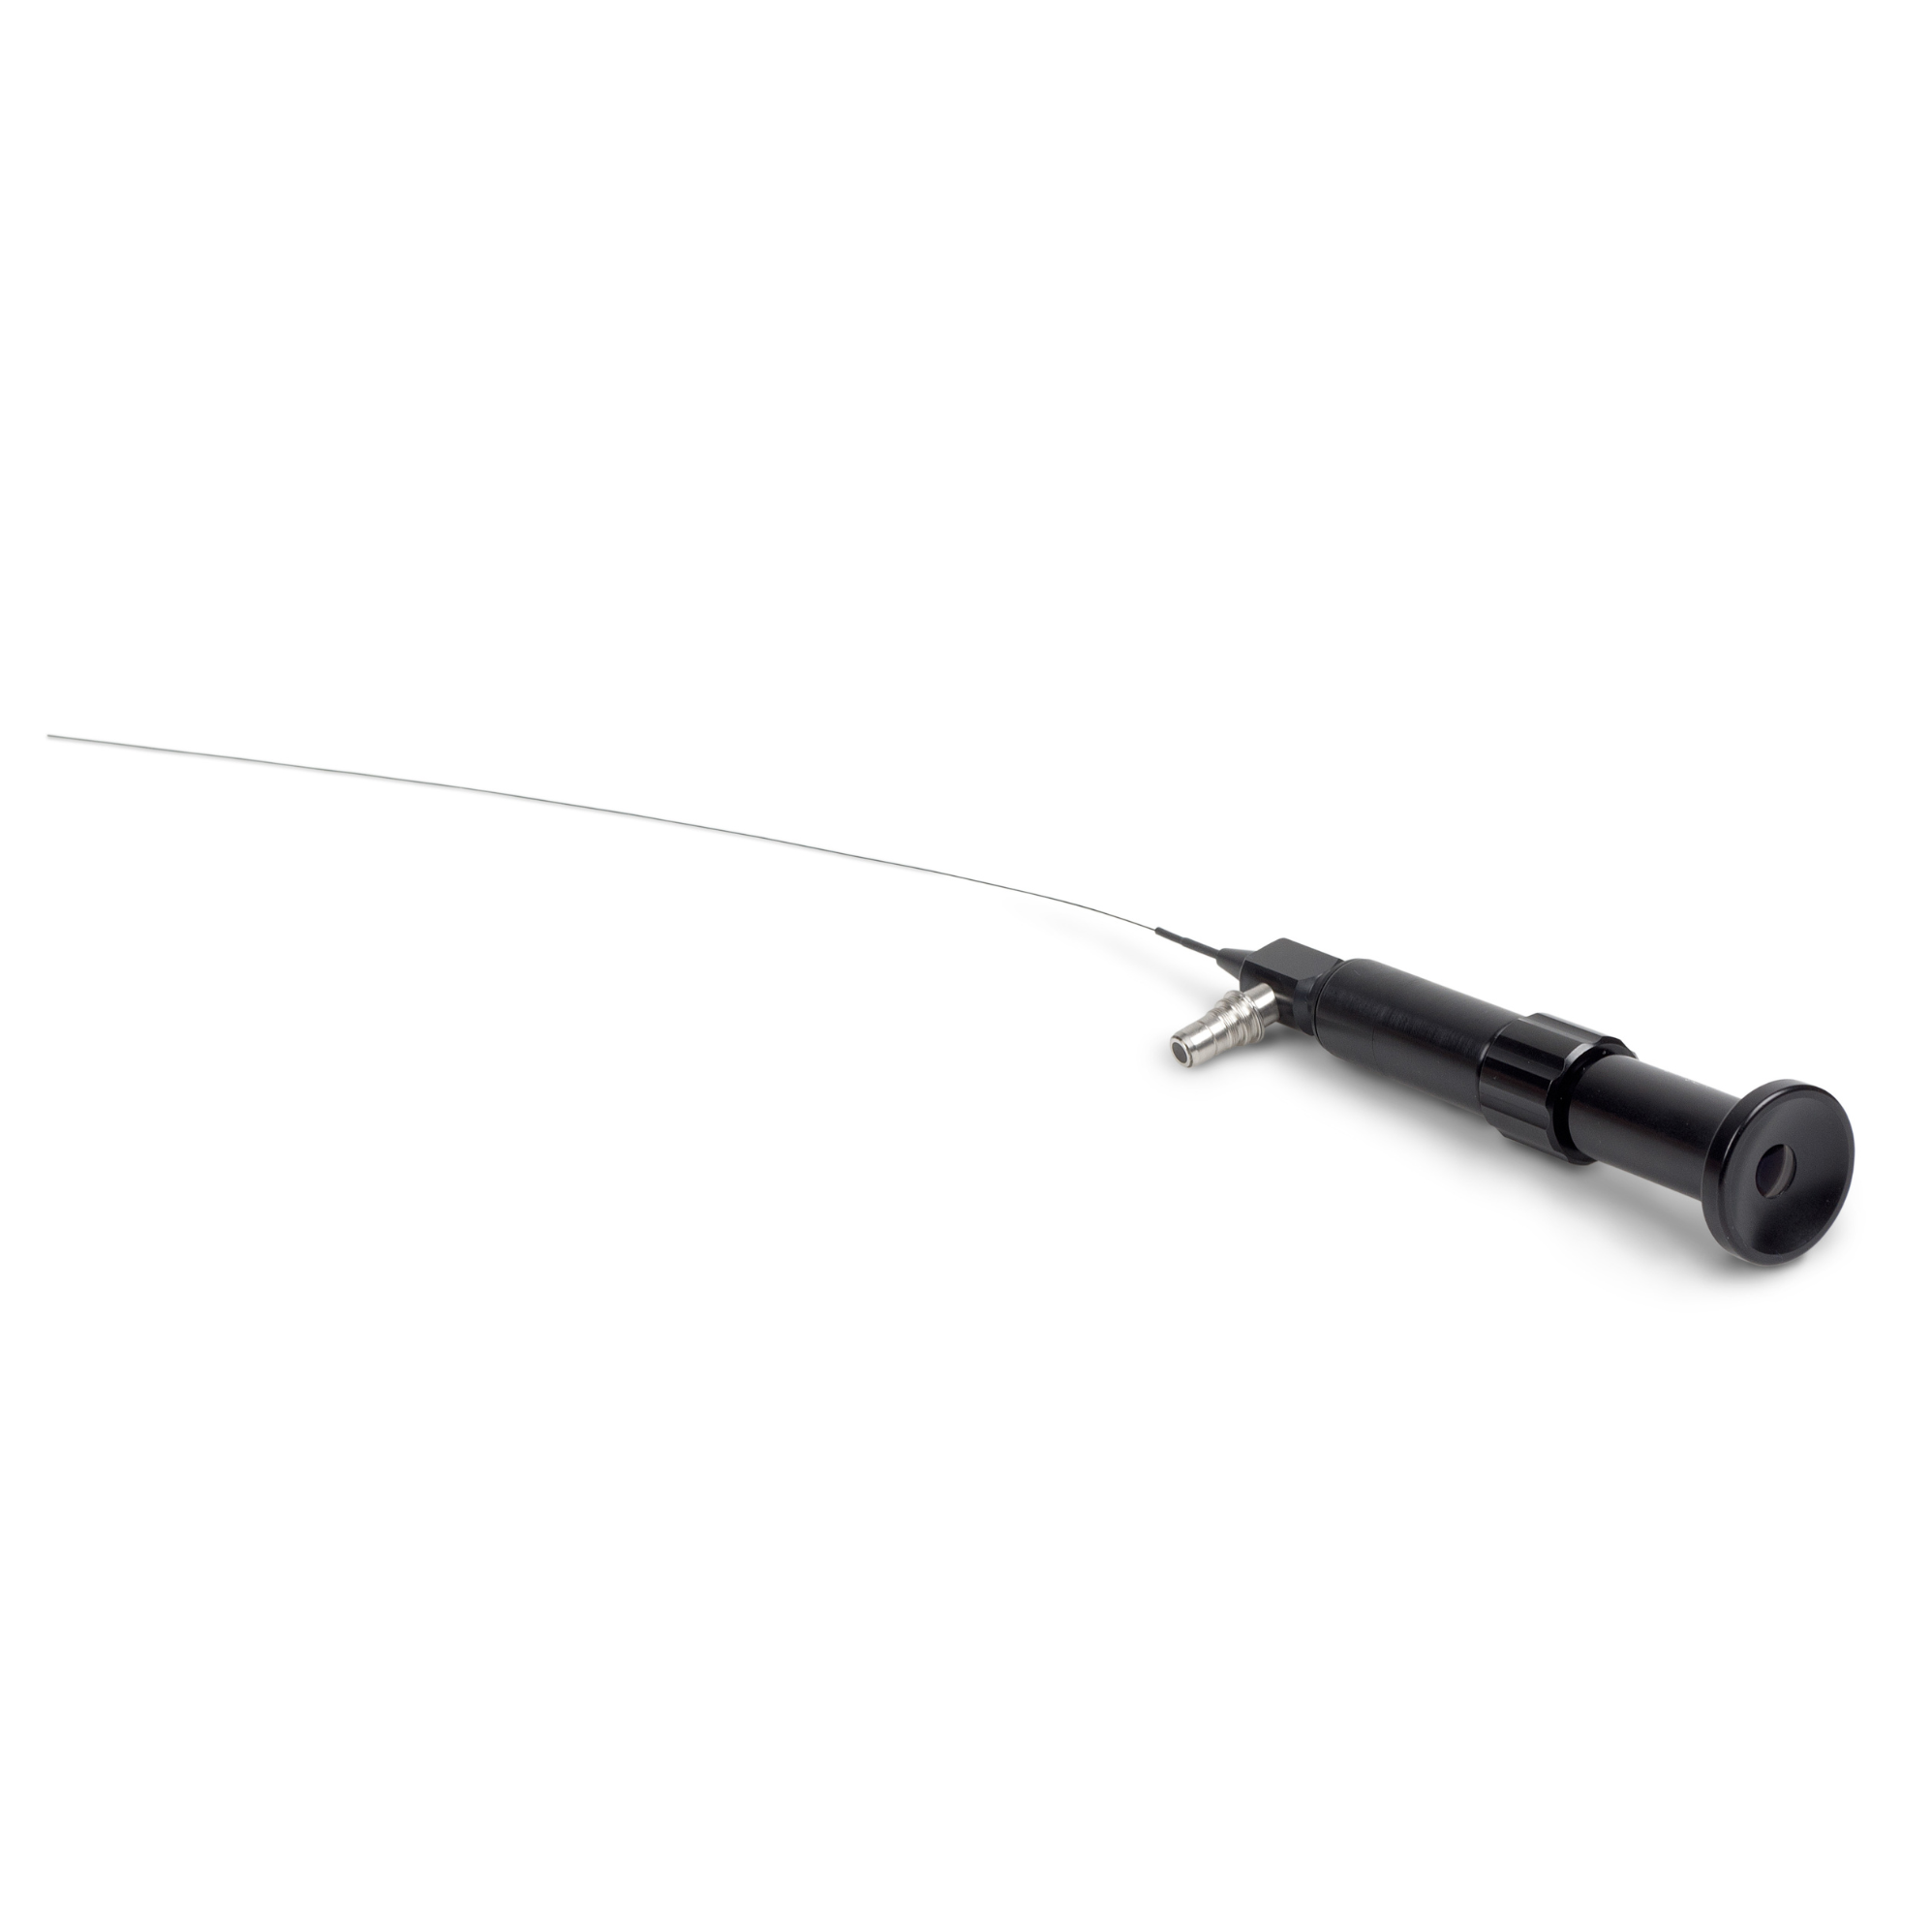 Fiberscope for Micro Inspections